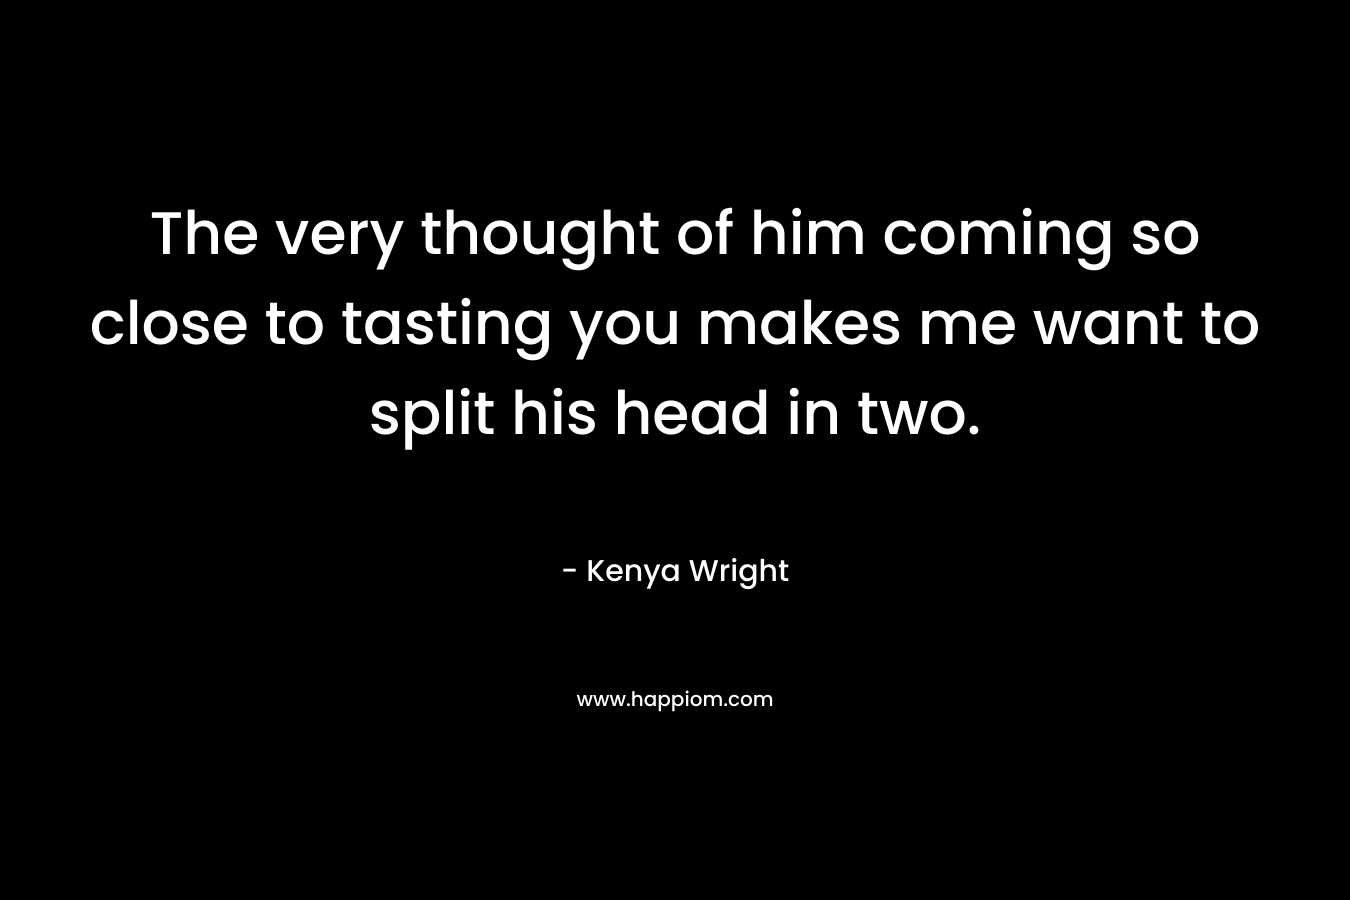 The very thought of him coming so close to tasting you makes me want to split his head in two.